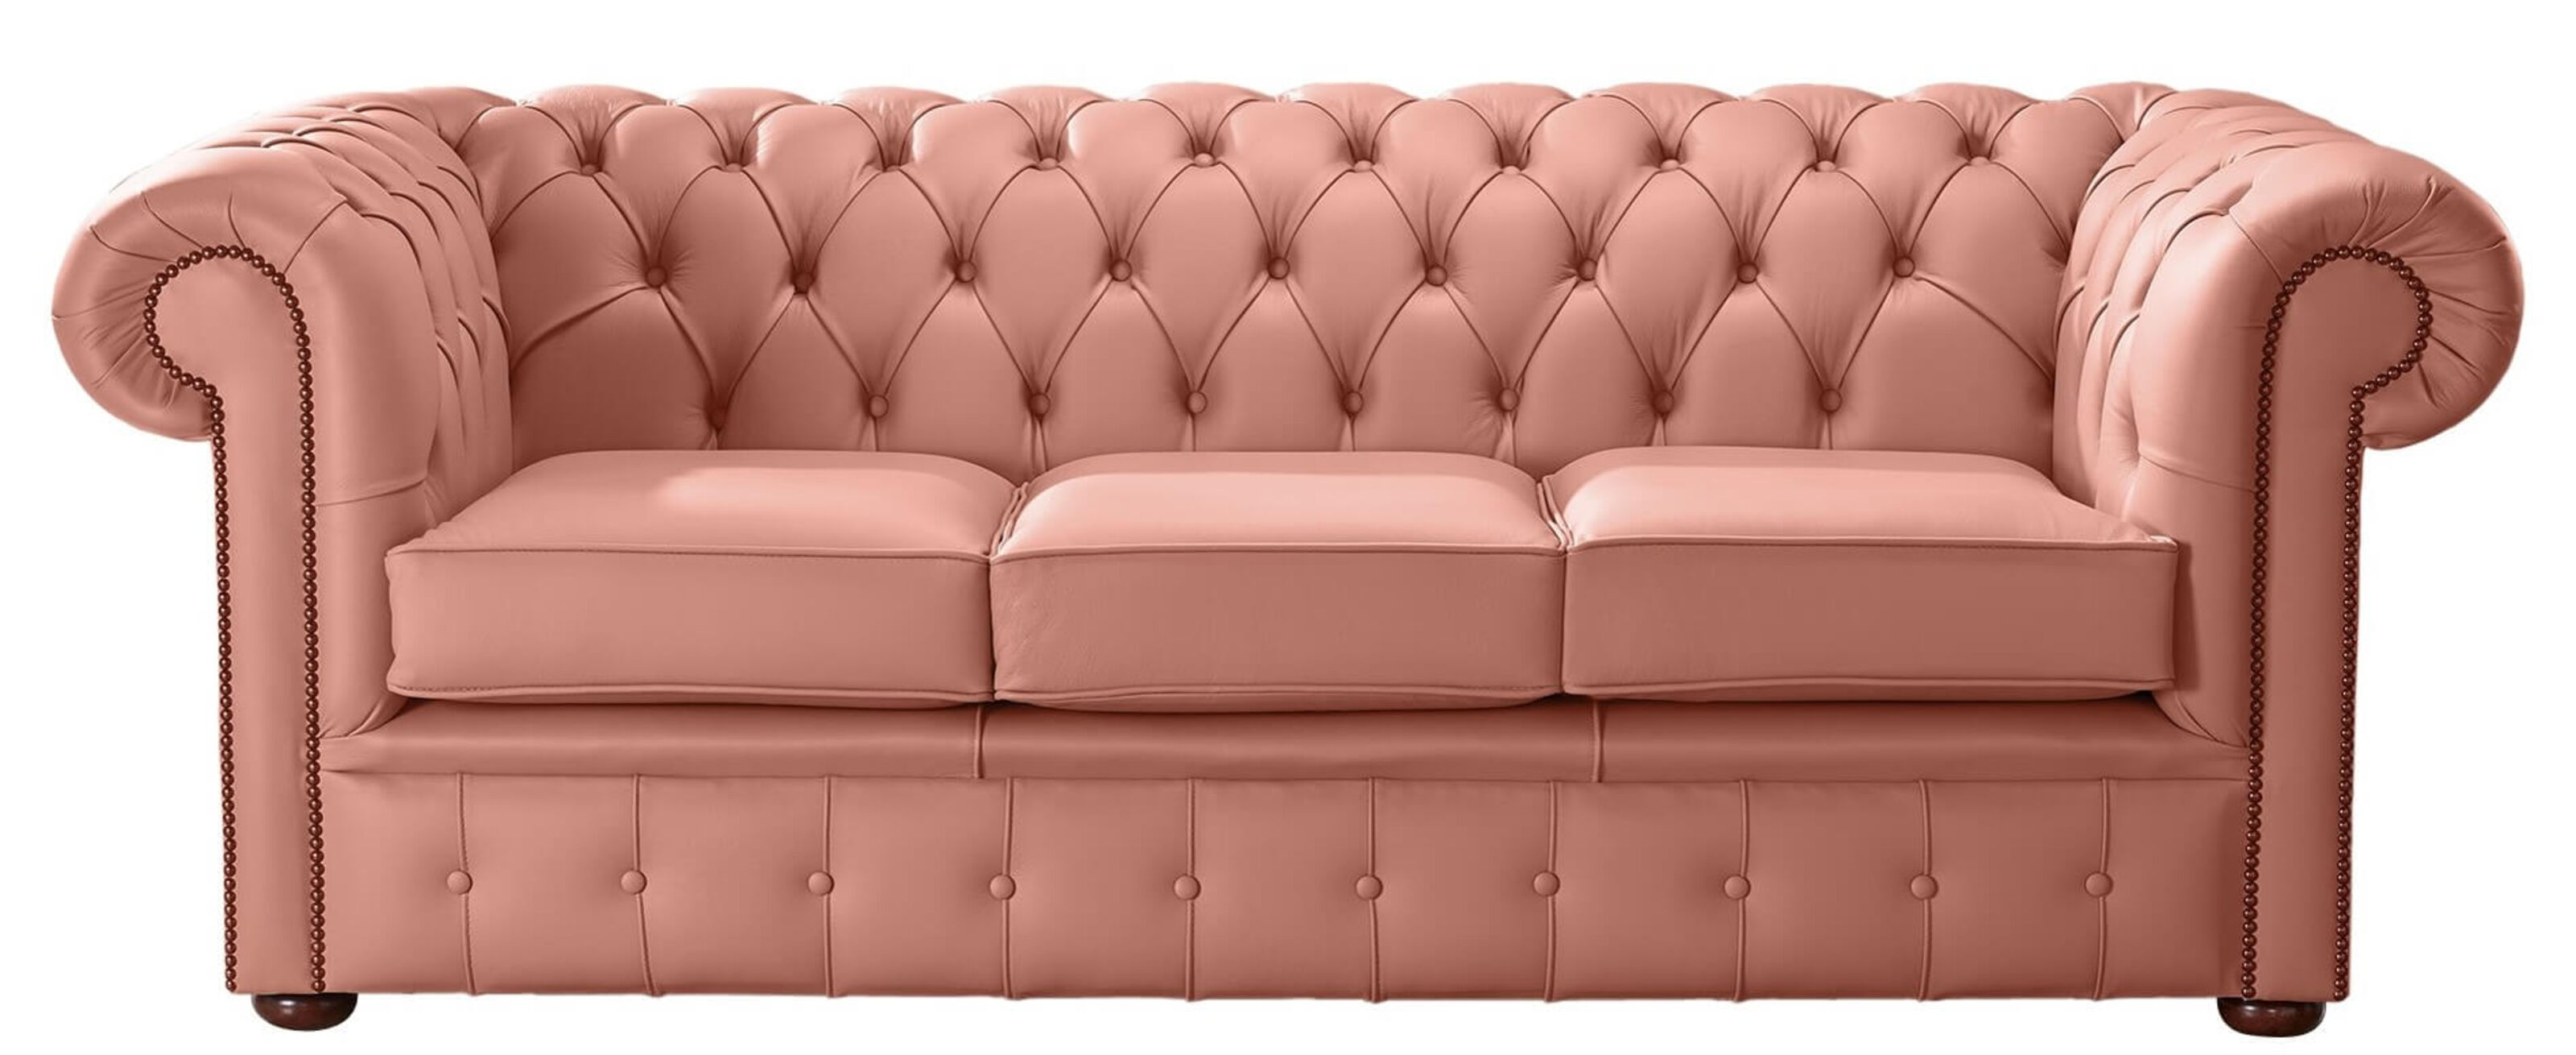 Why Chesterfield Leather Sofas Are a Total Crowd-Pleaser  %Post Title